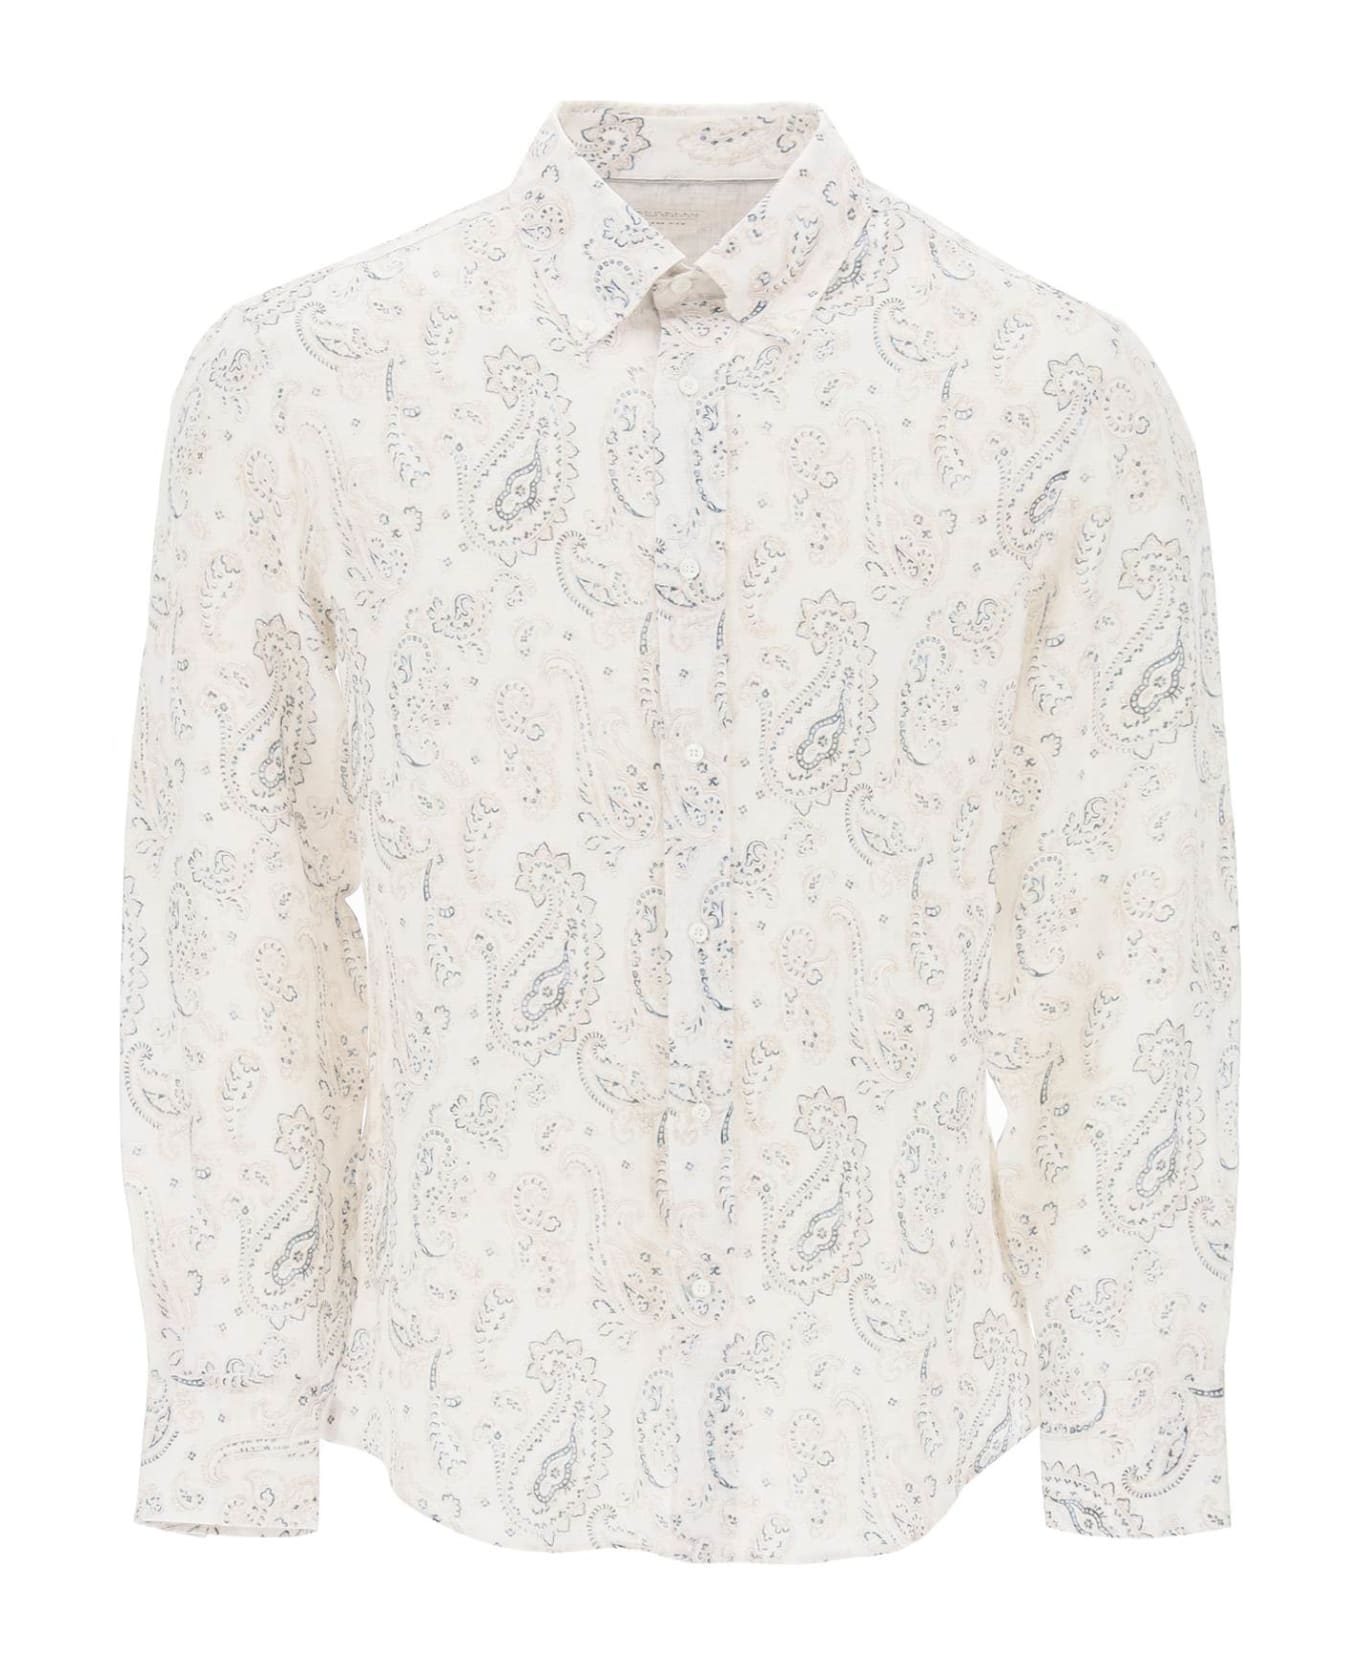 Brunello Cucinelli Linen Shirt With Paisley Pattern - BROWN PRUSSIA (White) シャツ